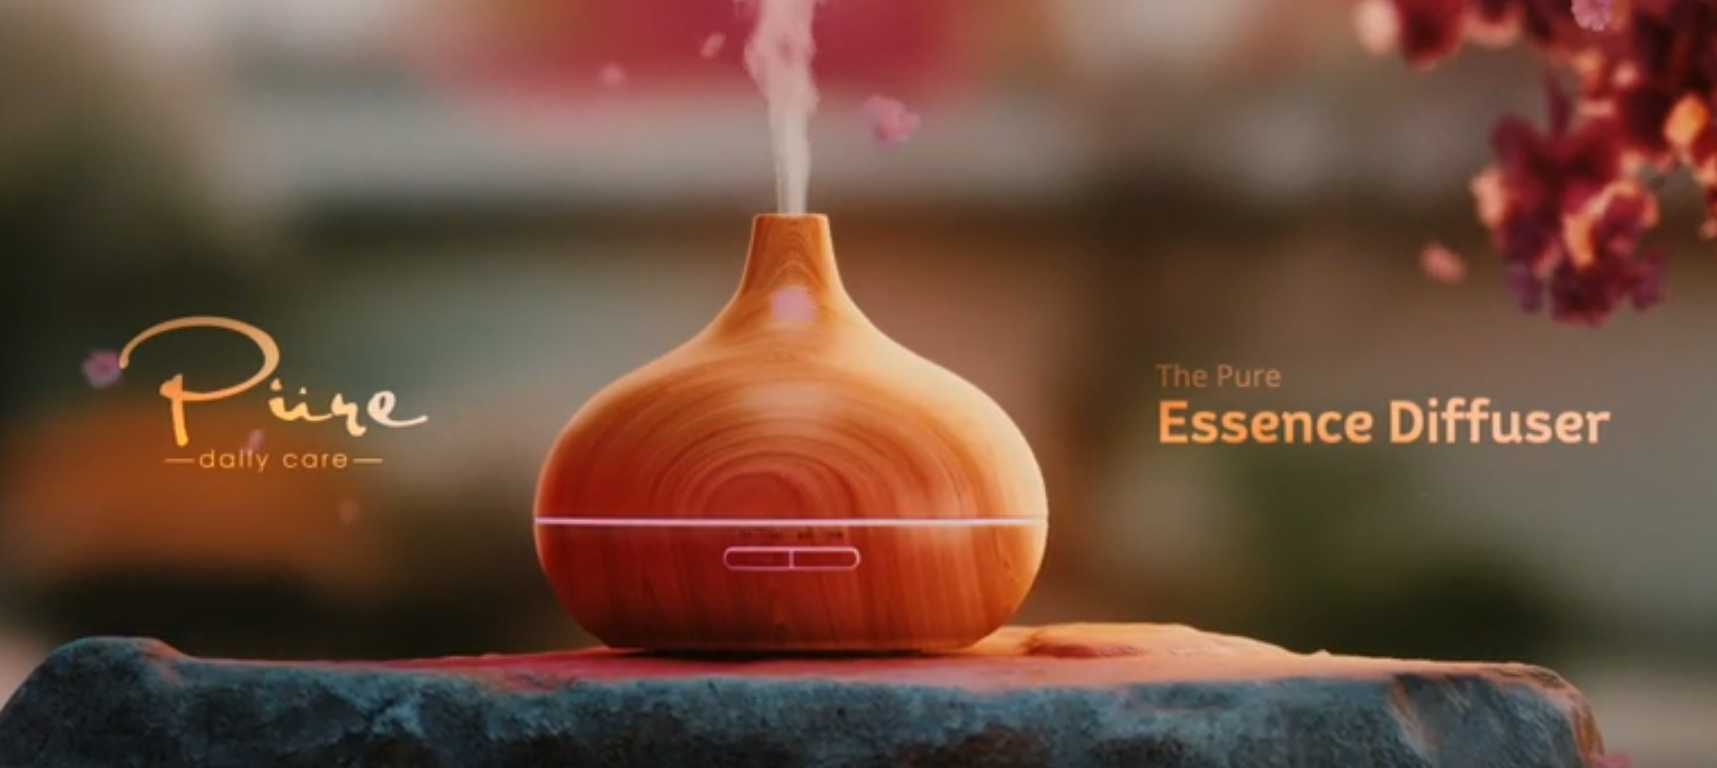 15 Best Essential Oil Diffusers - Top Diffusers for 2022